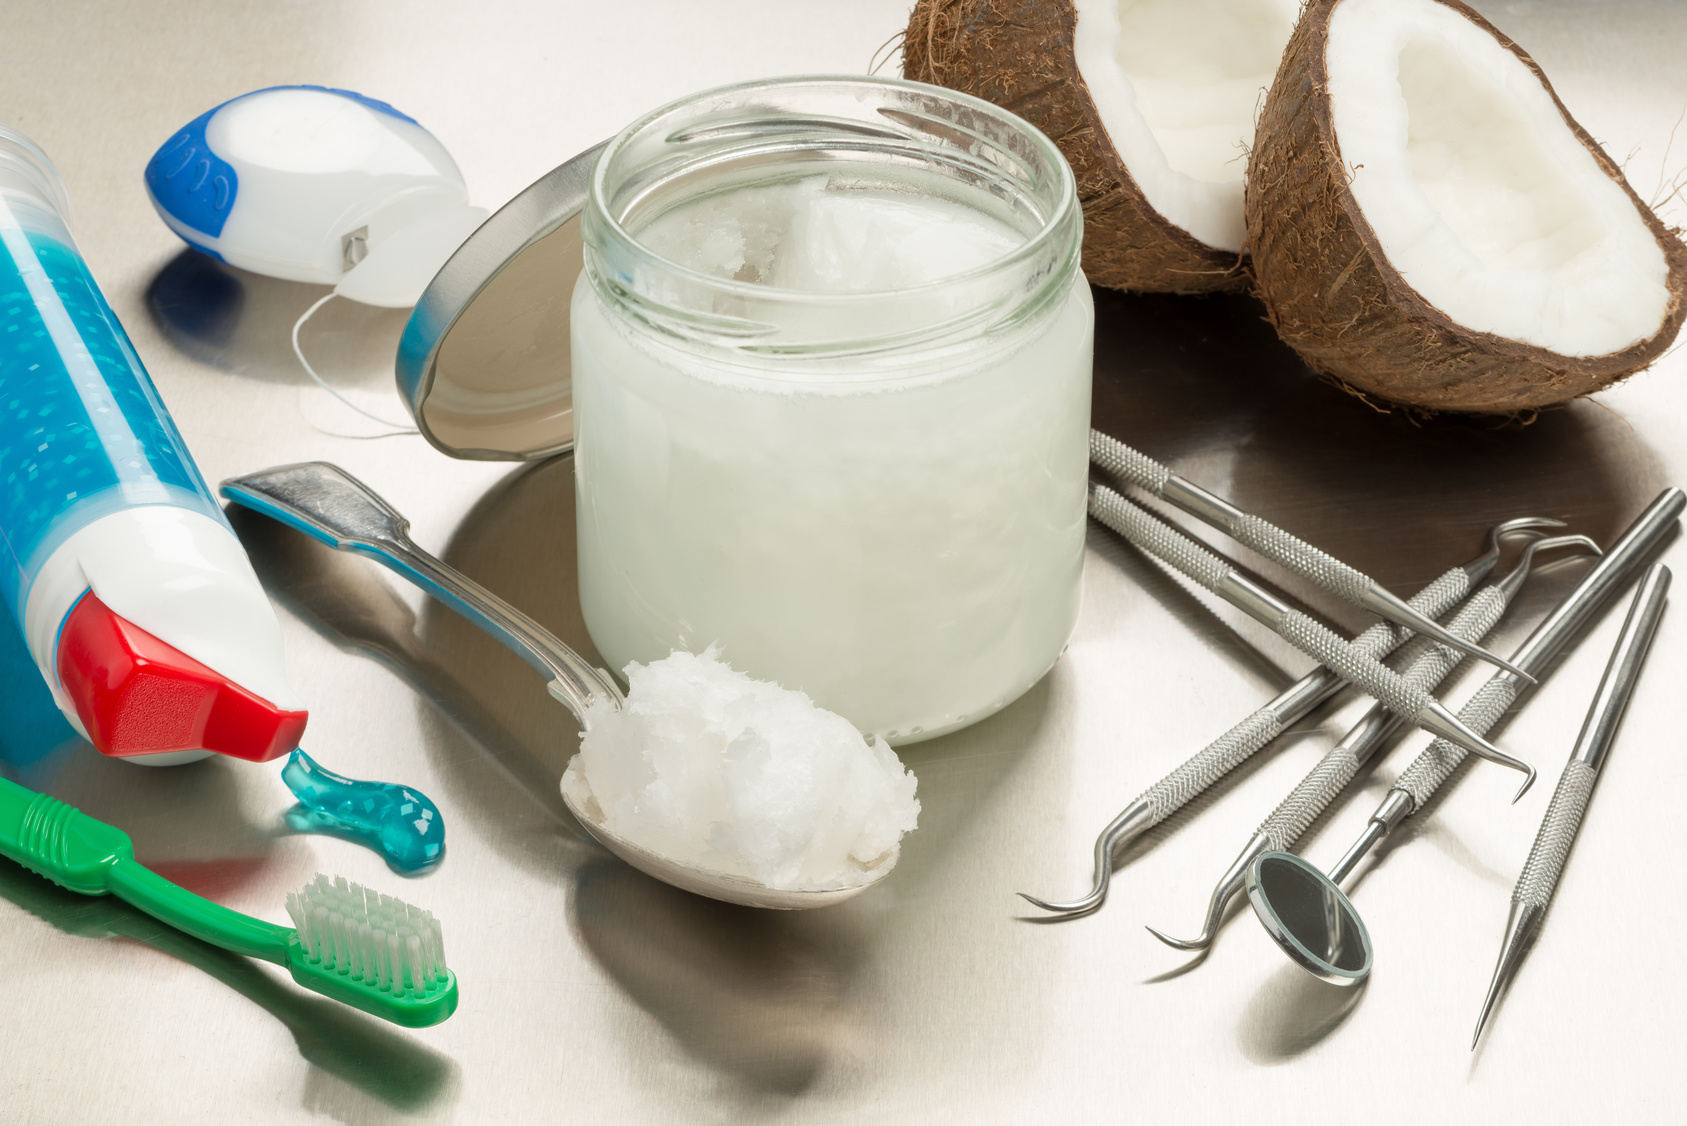 What Is Oil Pulling, and Does It Work?